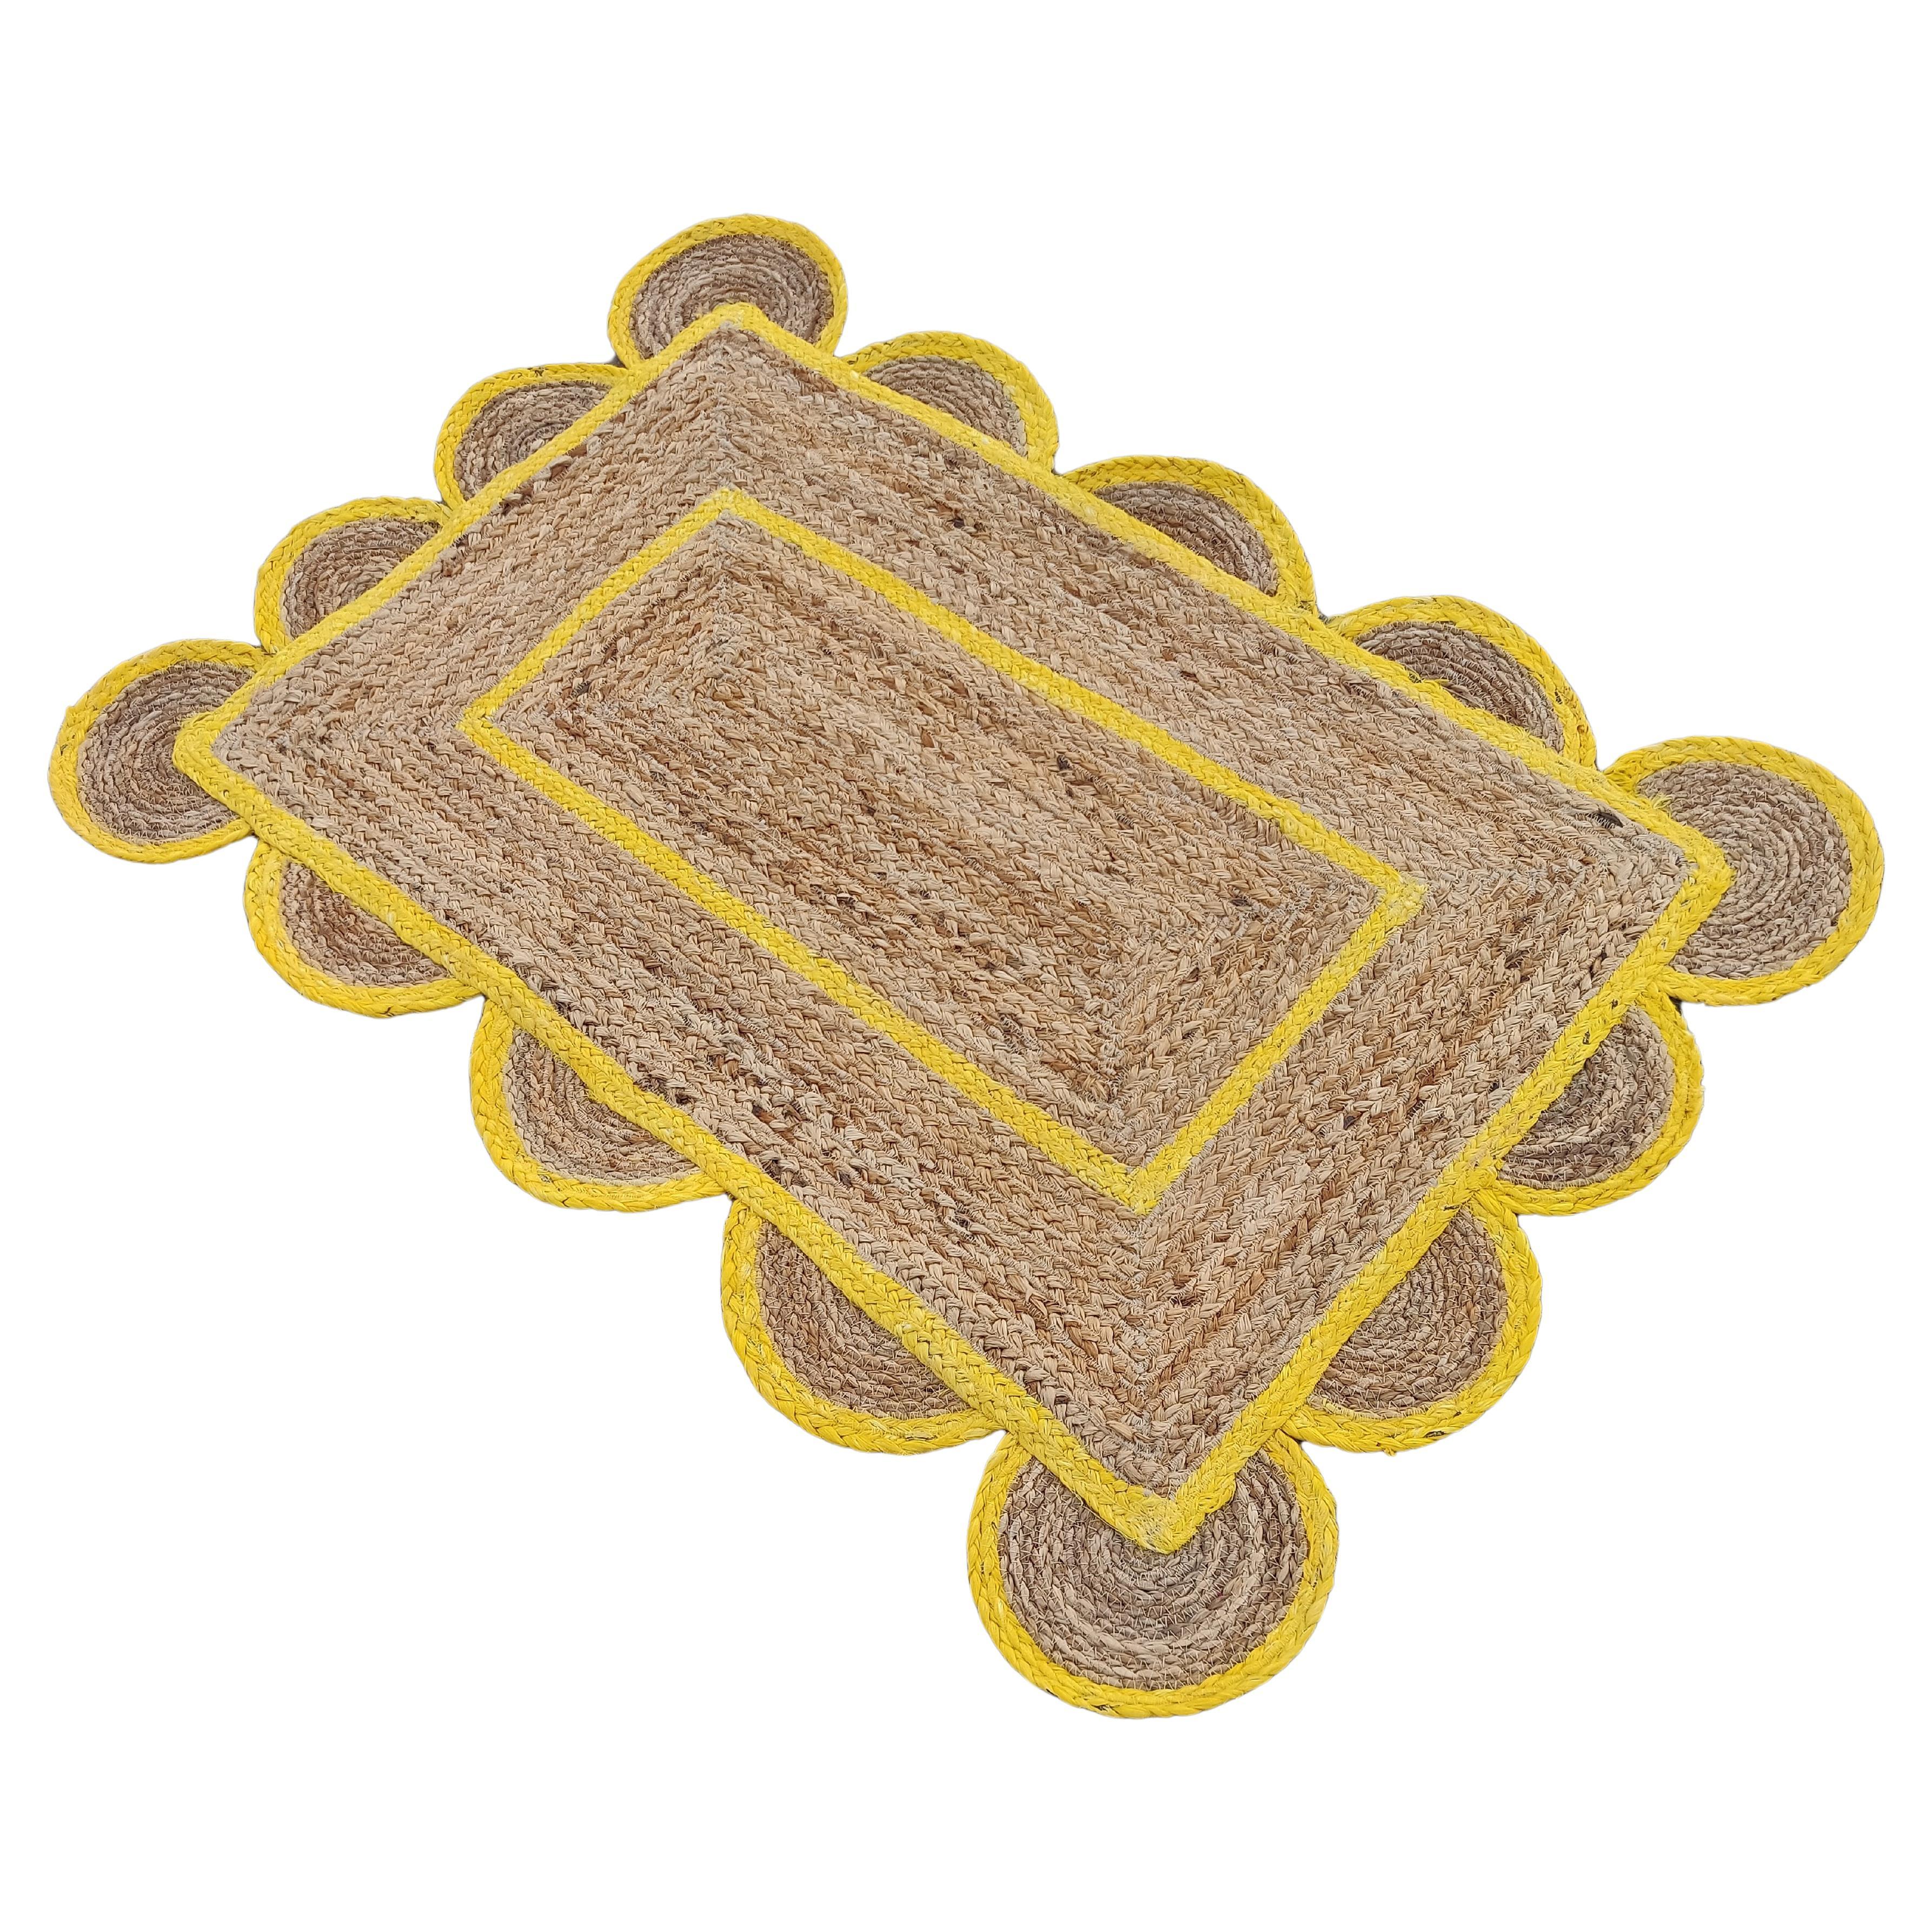 Handmade Jute Area Flat Weave Rug, 2x3 Jute Yellow Border Scallop Indian Dhurrie For Sale